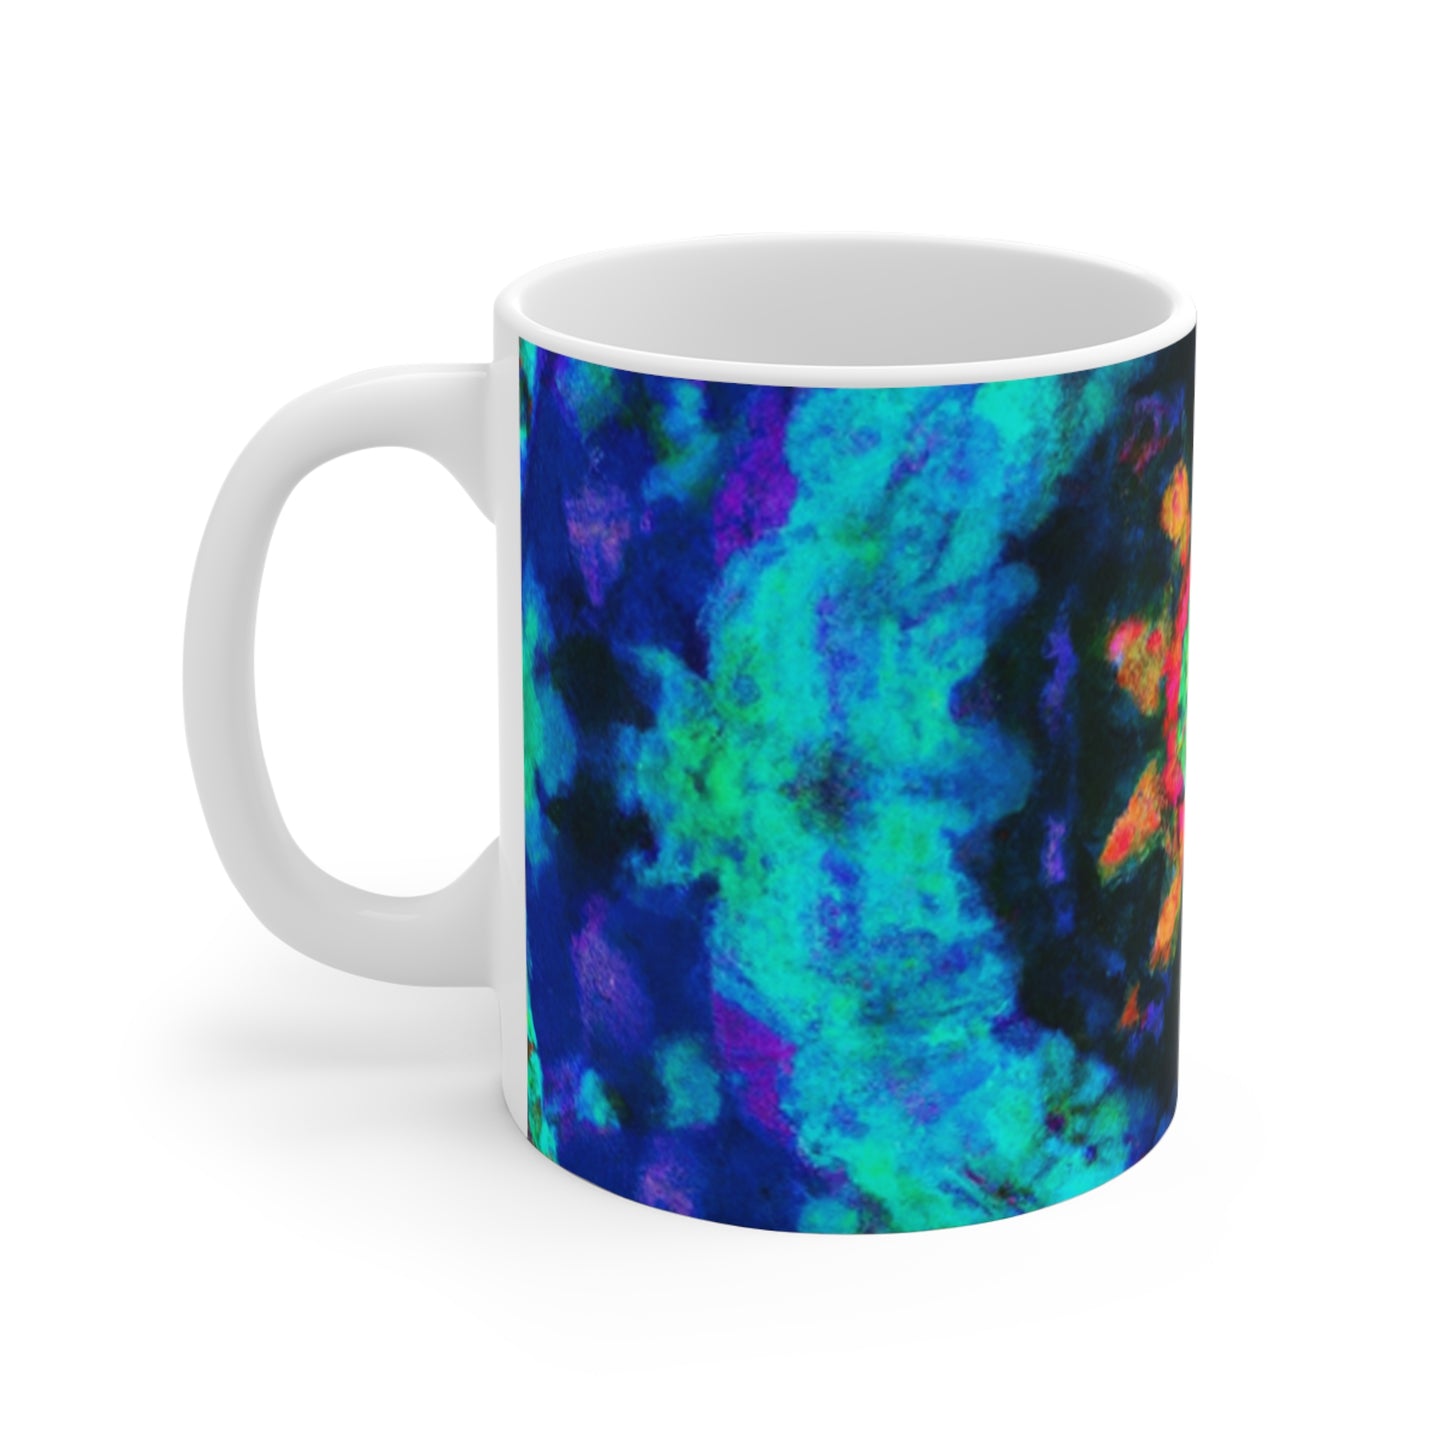 Sandy's Special Blend Coffee Roasters - Psychedelic Coffee Cup Mug 11 Ounce